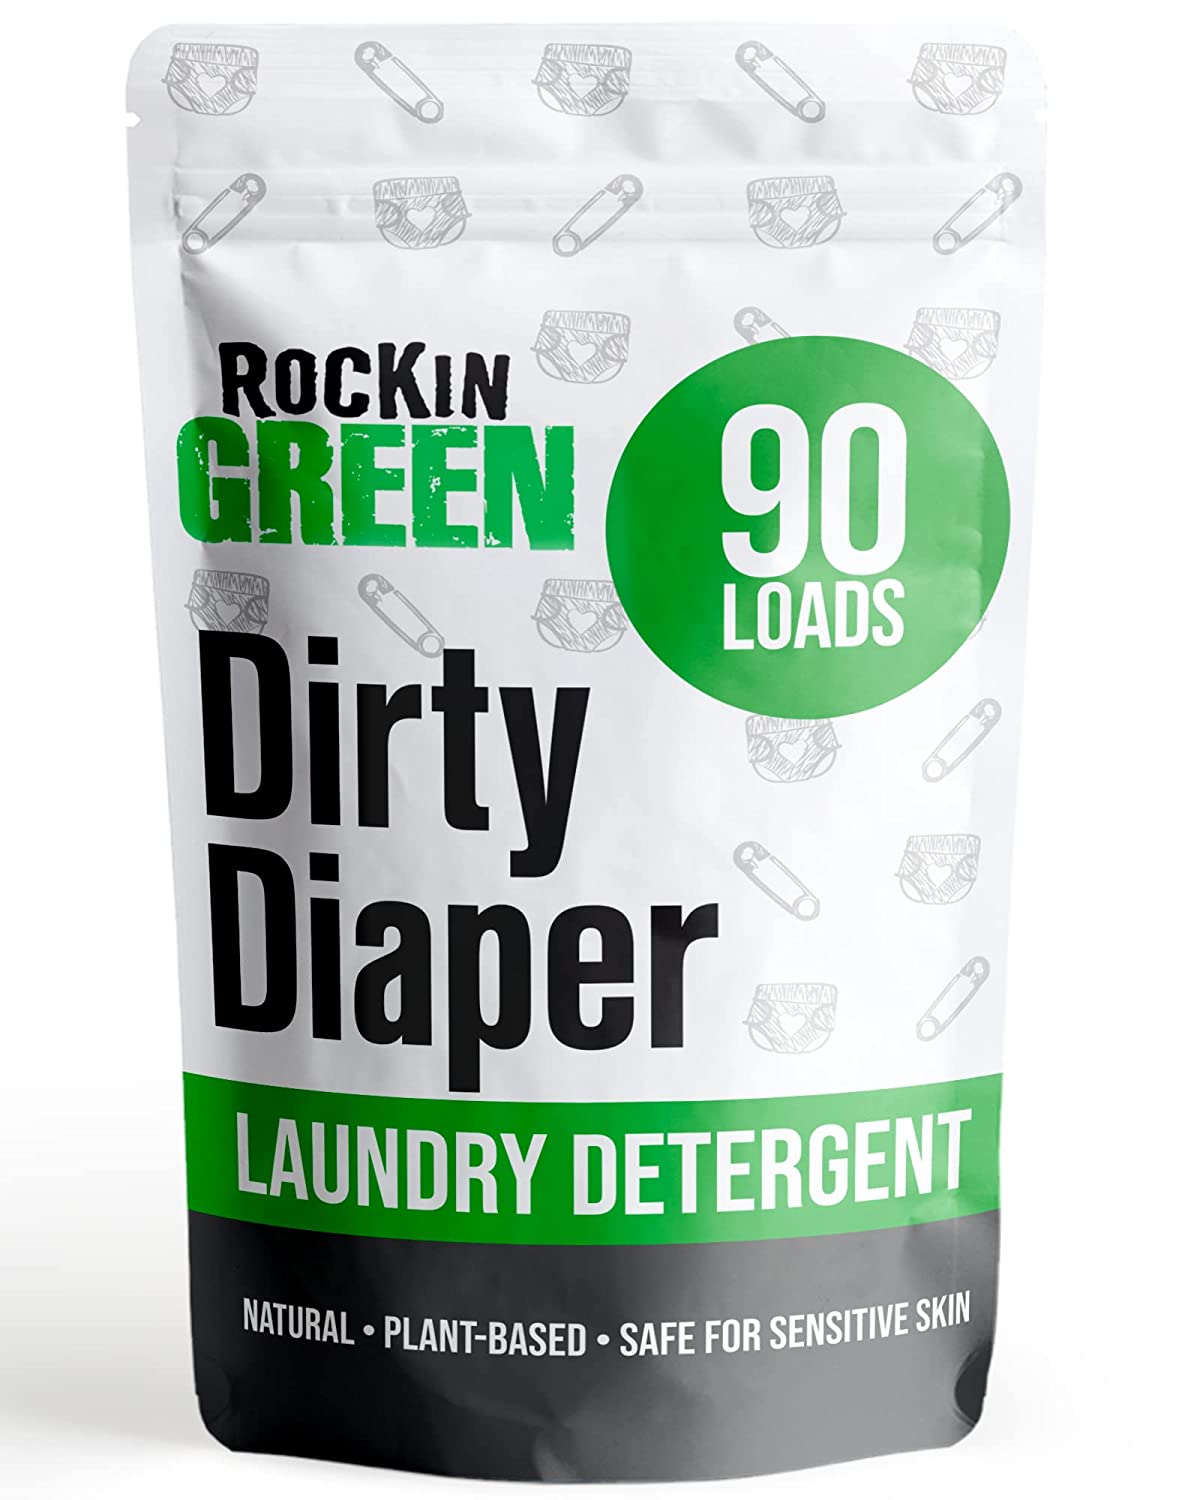 Rockin' Green 45oz (90 Loads) Cloth Diaper Detergent for Baby Clothes - All Natural Baby Laundry Powder - Unscented & Biodegradable - Removes Urine Smell, Safe for Sensitive Skin